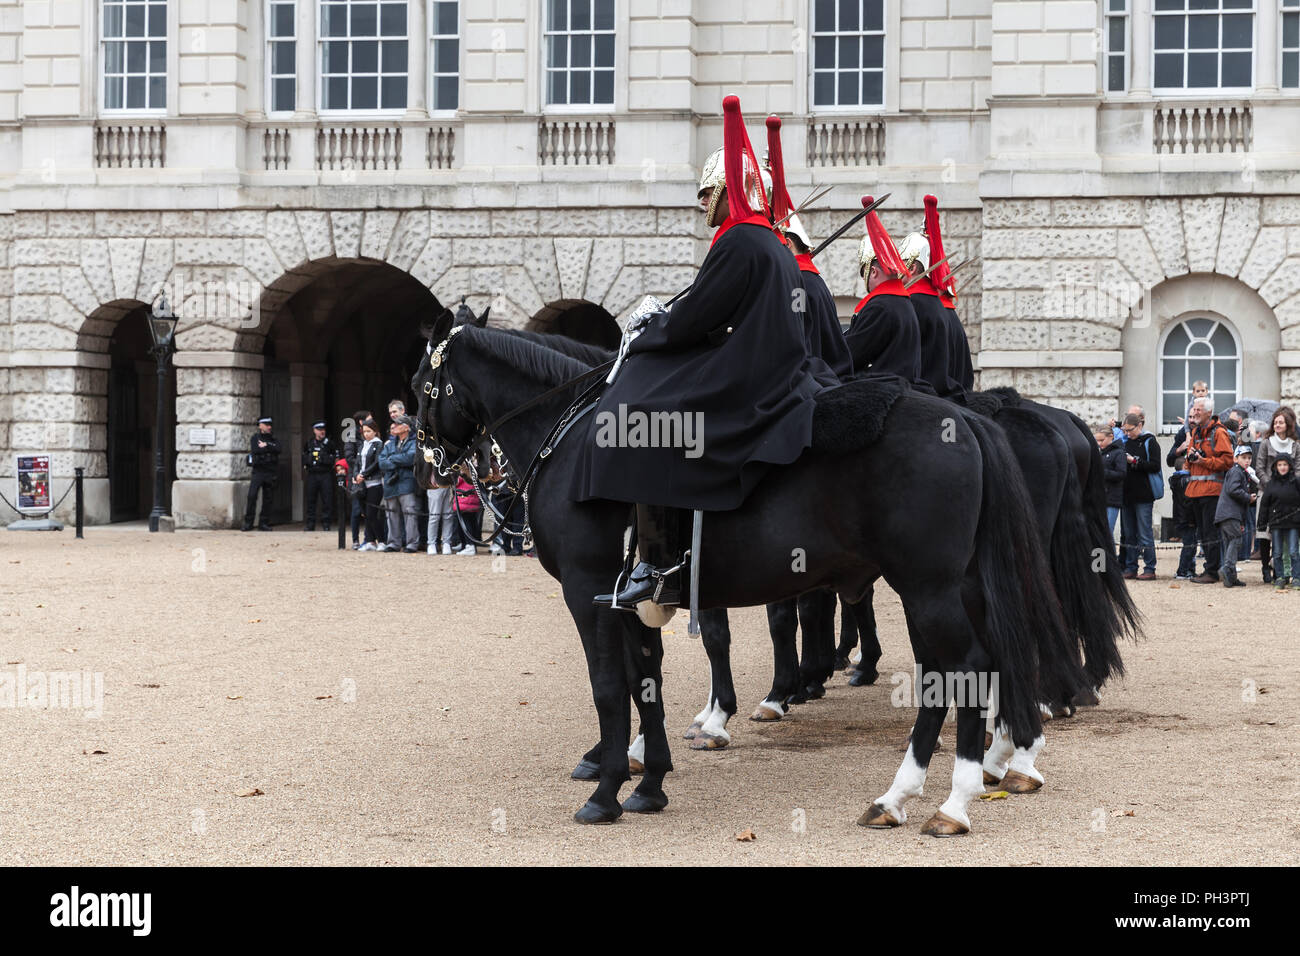 London, United Kingdom - October 29, 2017: Guards near Horse Guards of Whitehall in central London. Tourists watch the ceremony Stock Photo